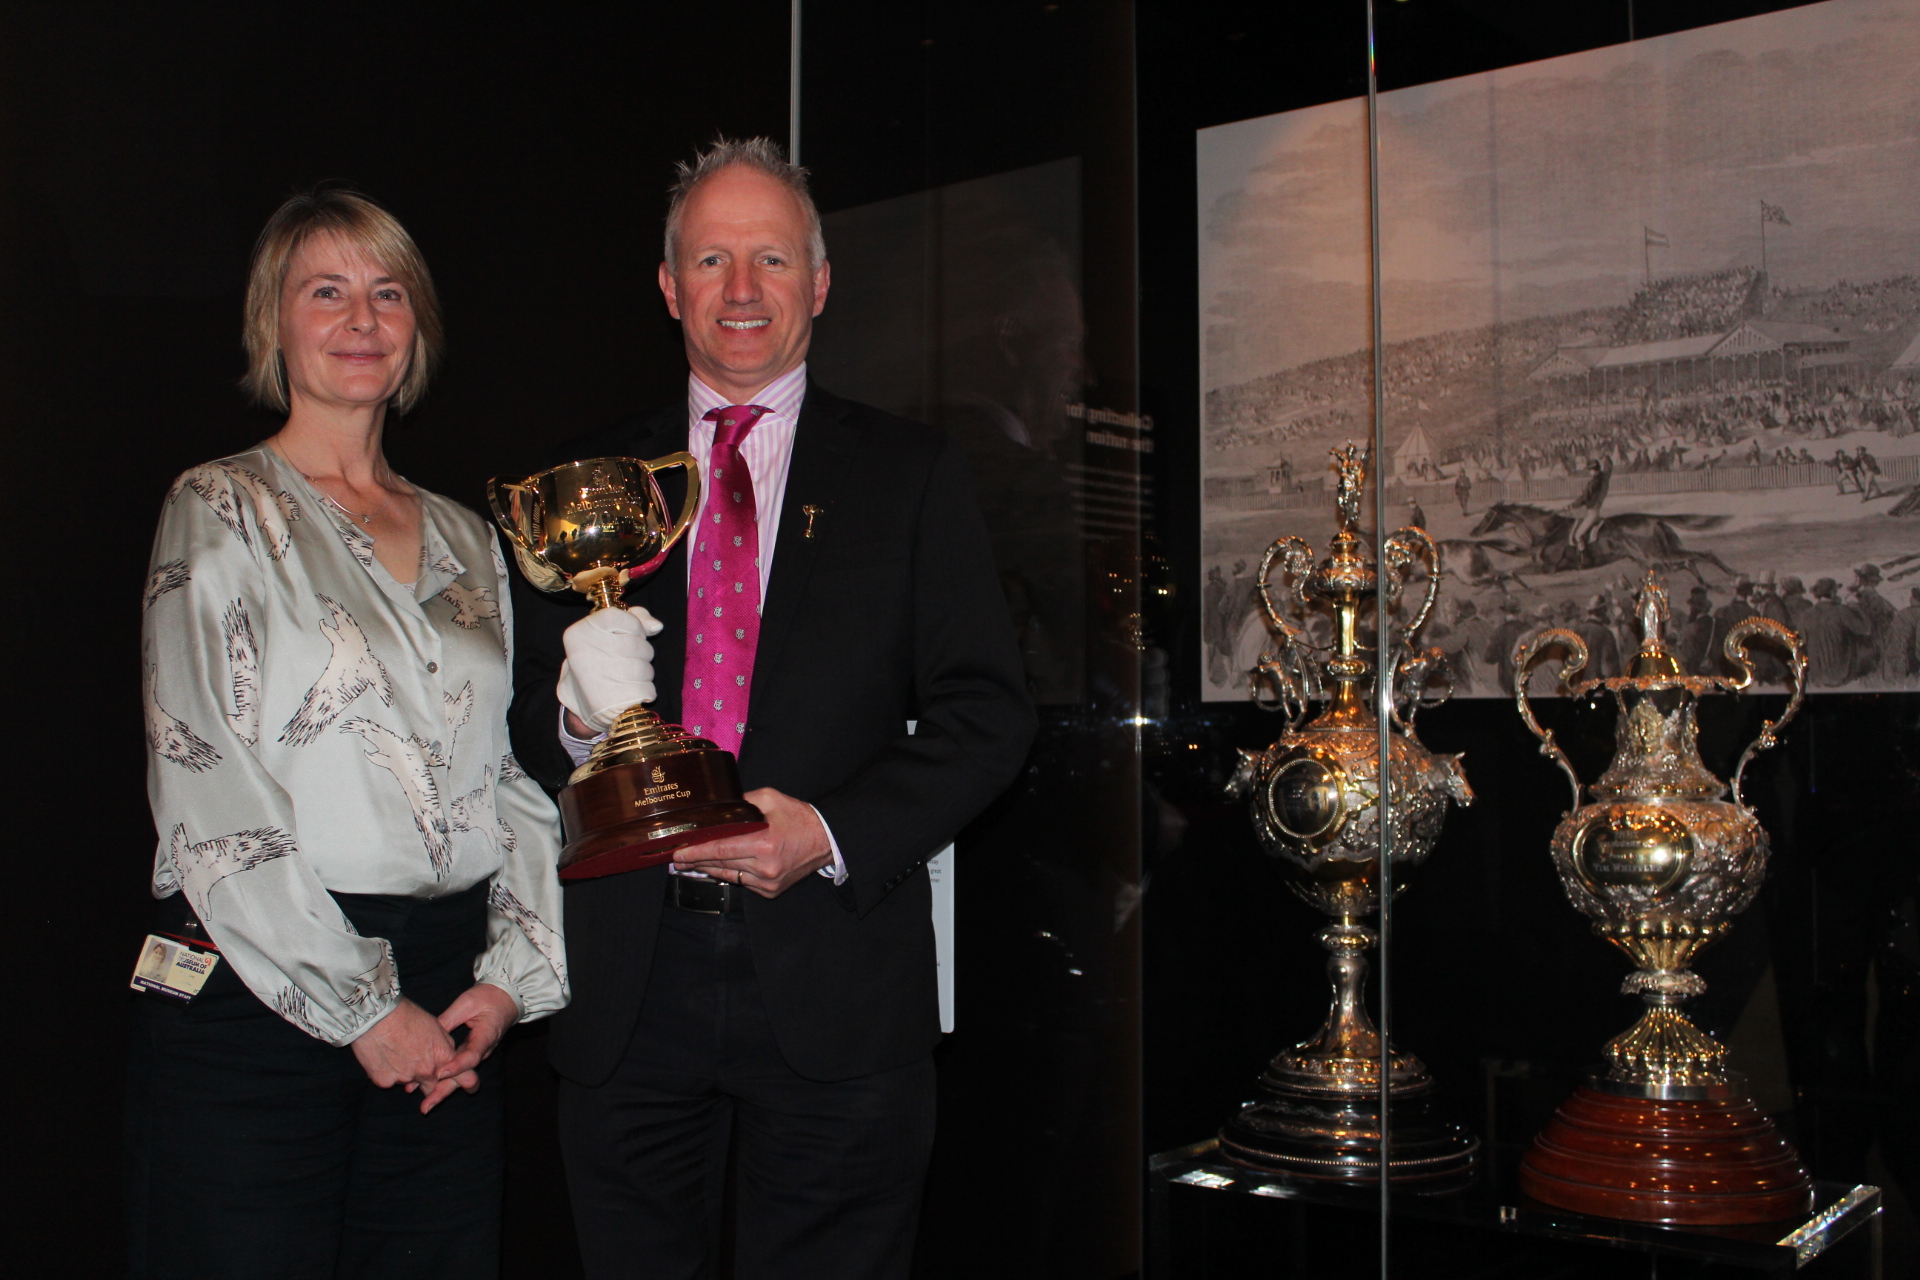 A man holding a gold cup and a woman stand next to a display case holding two ornate silver trophies.